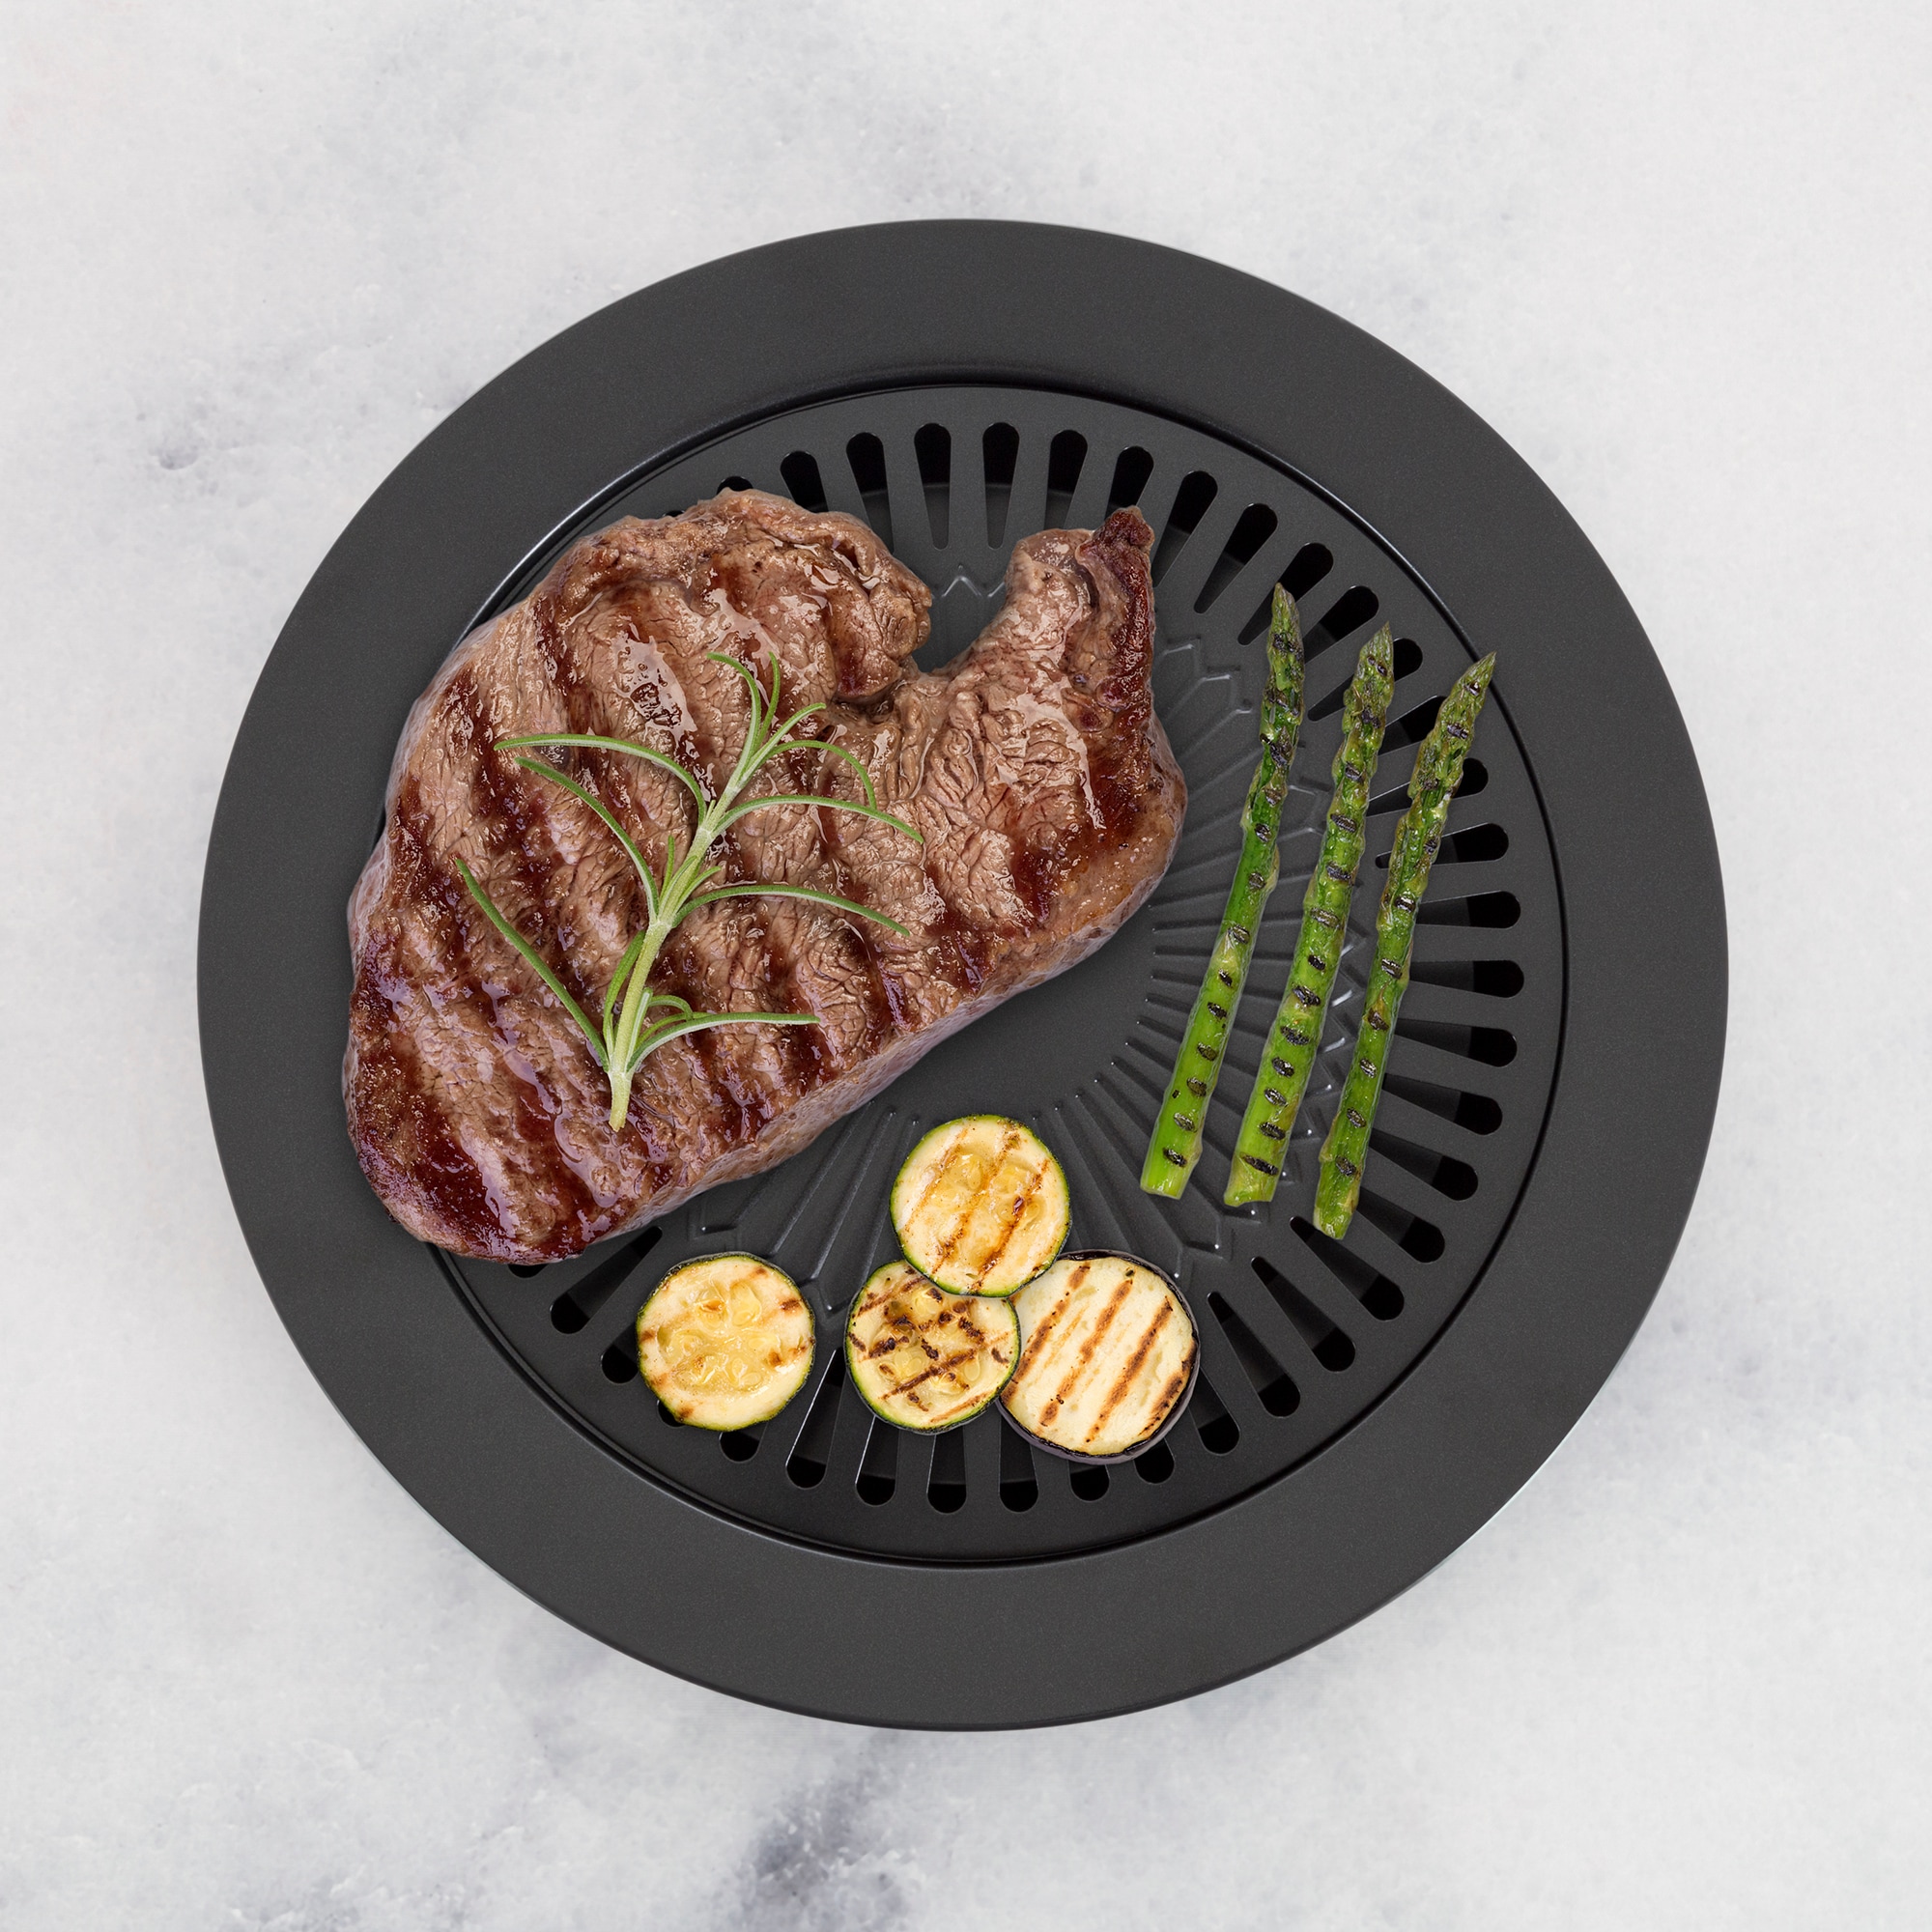 12 Electric Stainless Steel Indoor Grill